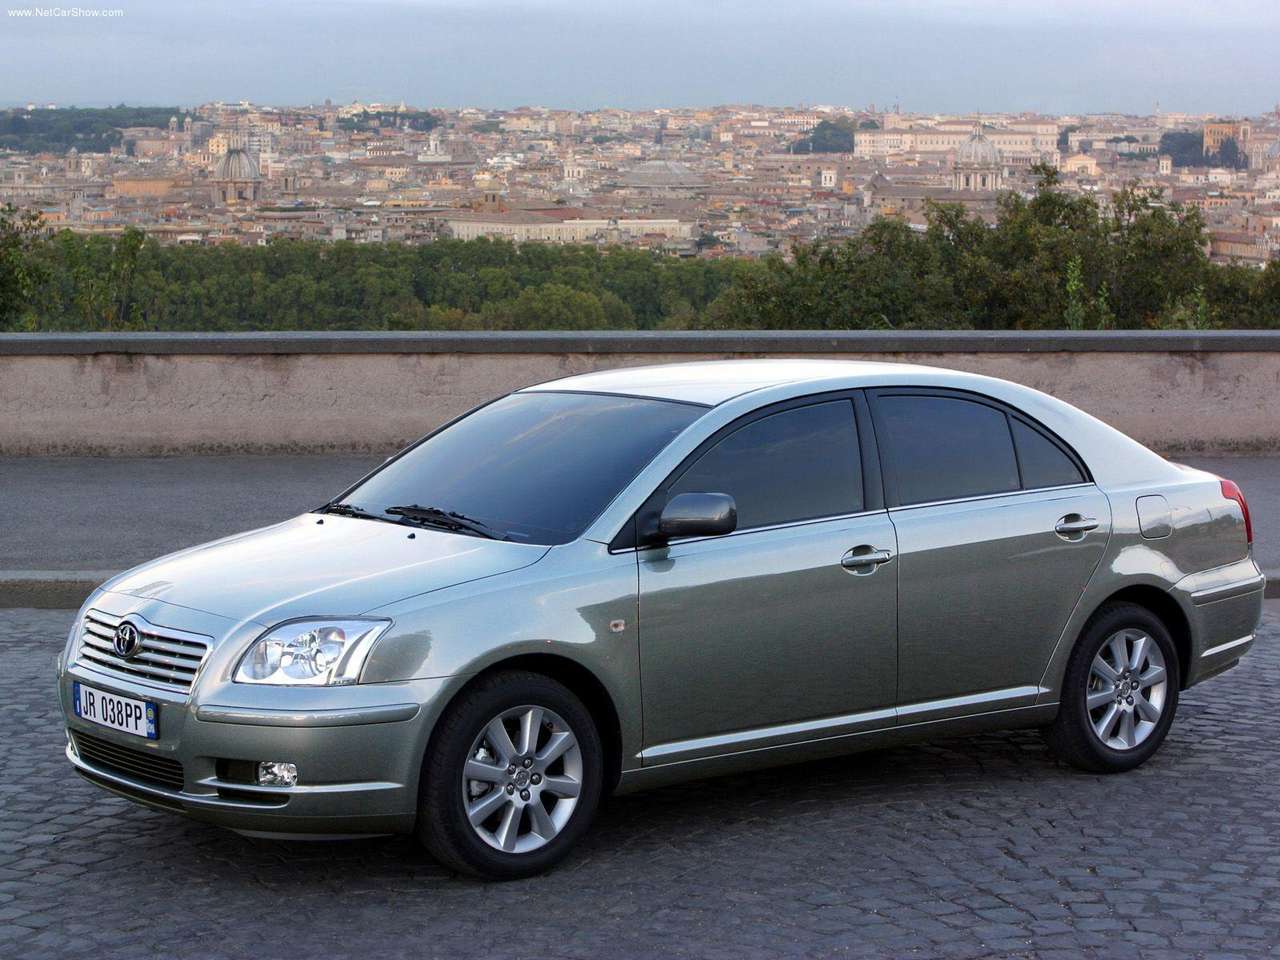 Toyota Avensis I Restyling 2000 - 2003 Station wagon 5 door #4